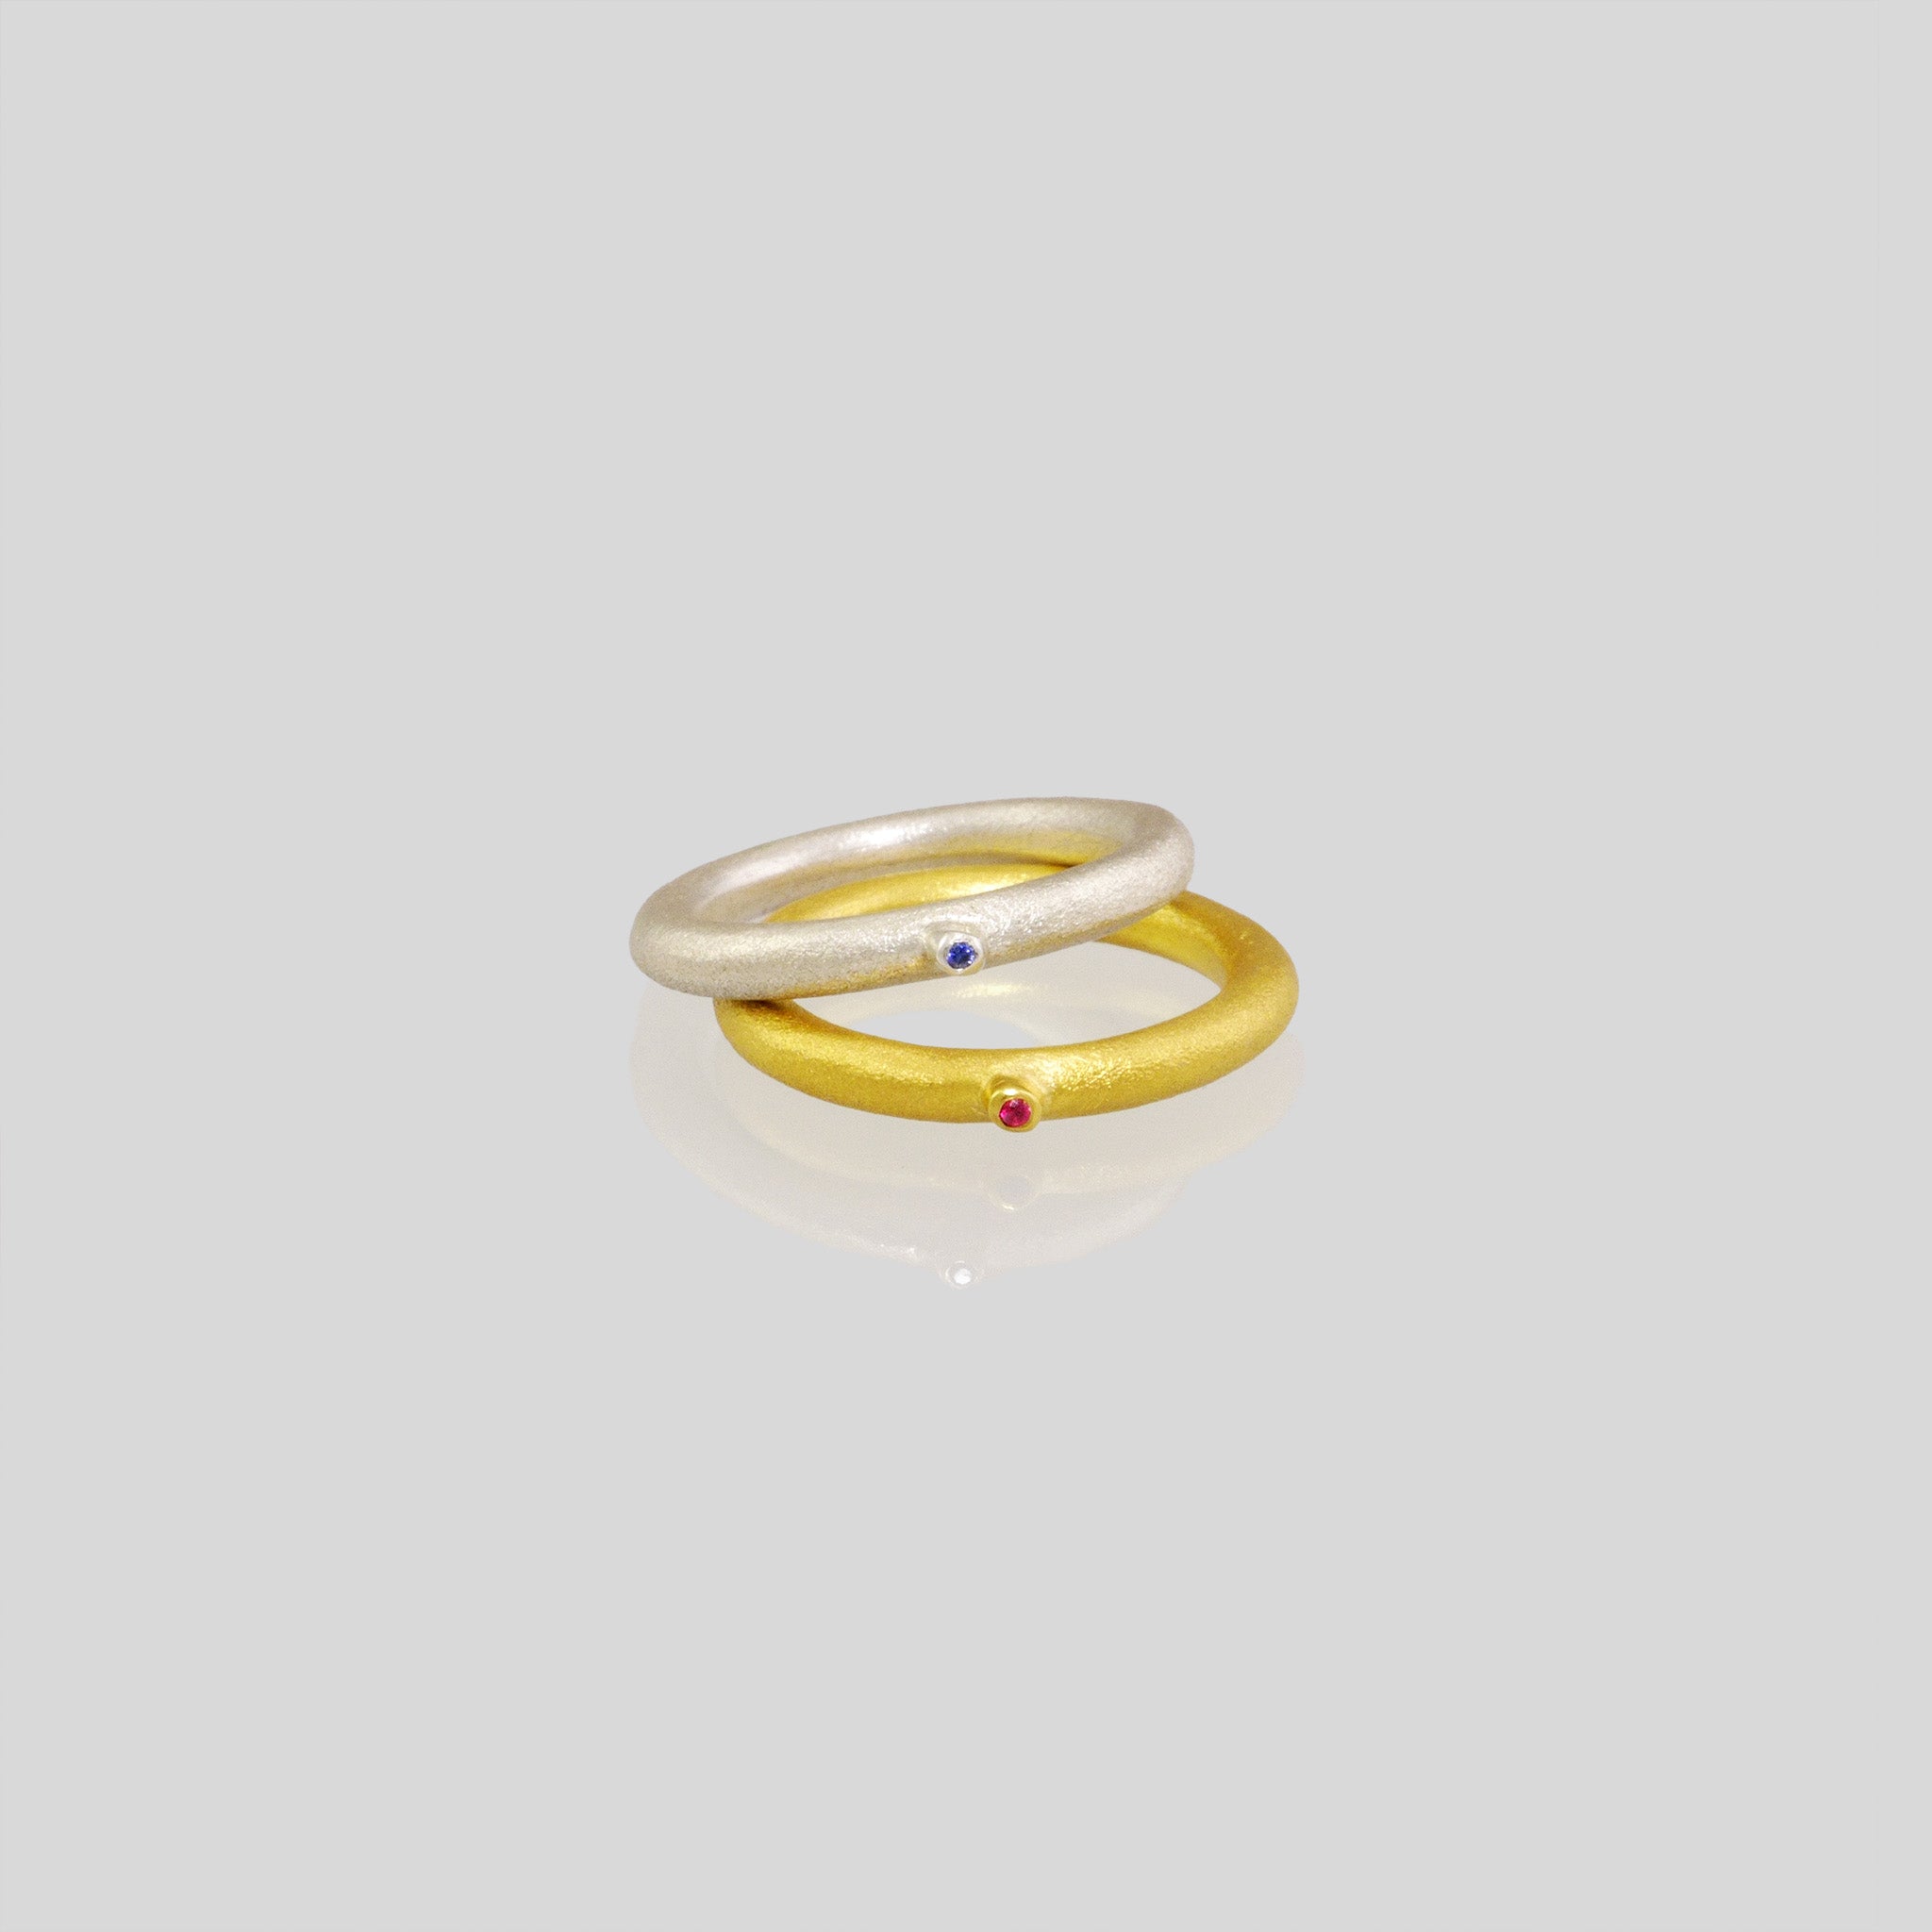 18k (White\Yellow) Gold Rings with a round matte finish and a slender tentacle extending from it, adorned with an inlaid ruby stone. Inspired by a small slug observed on the porch, the design exudes a delicate, natural charm with a playful touch.